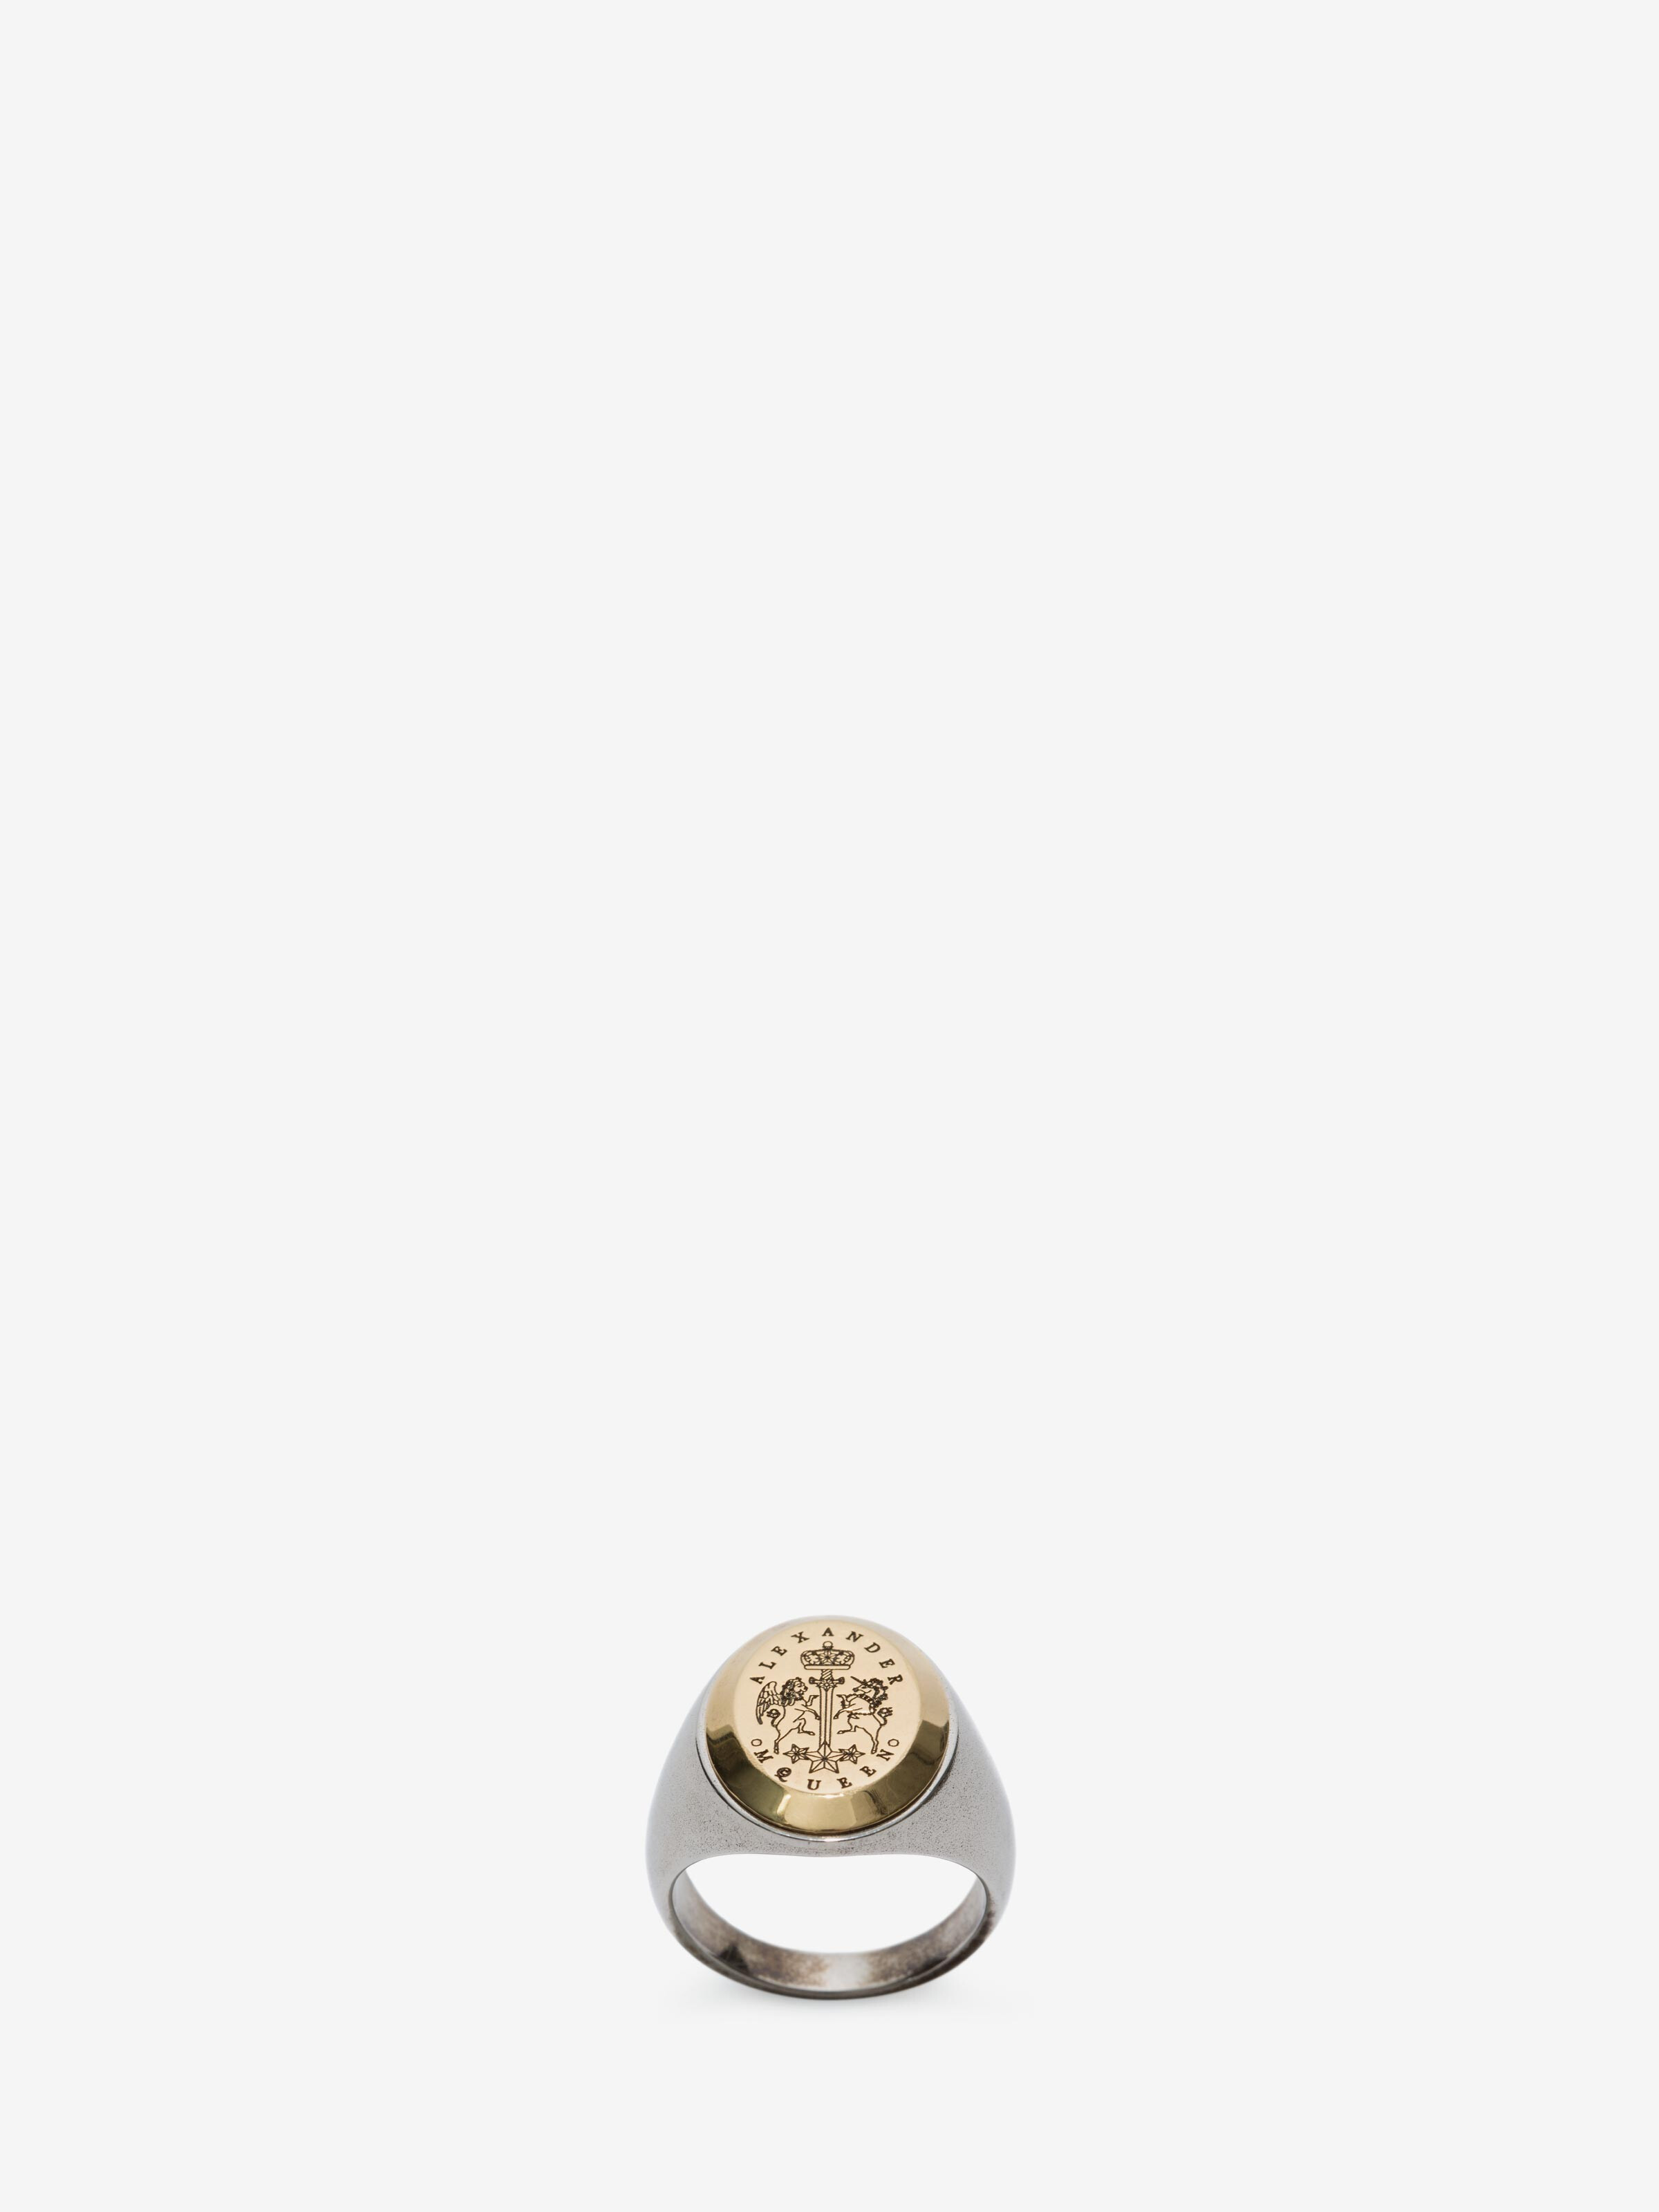 Signet Ring in Antique Silver 